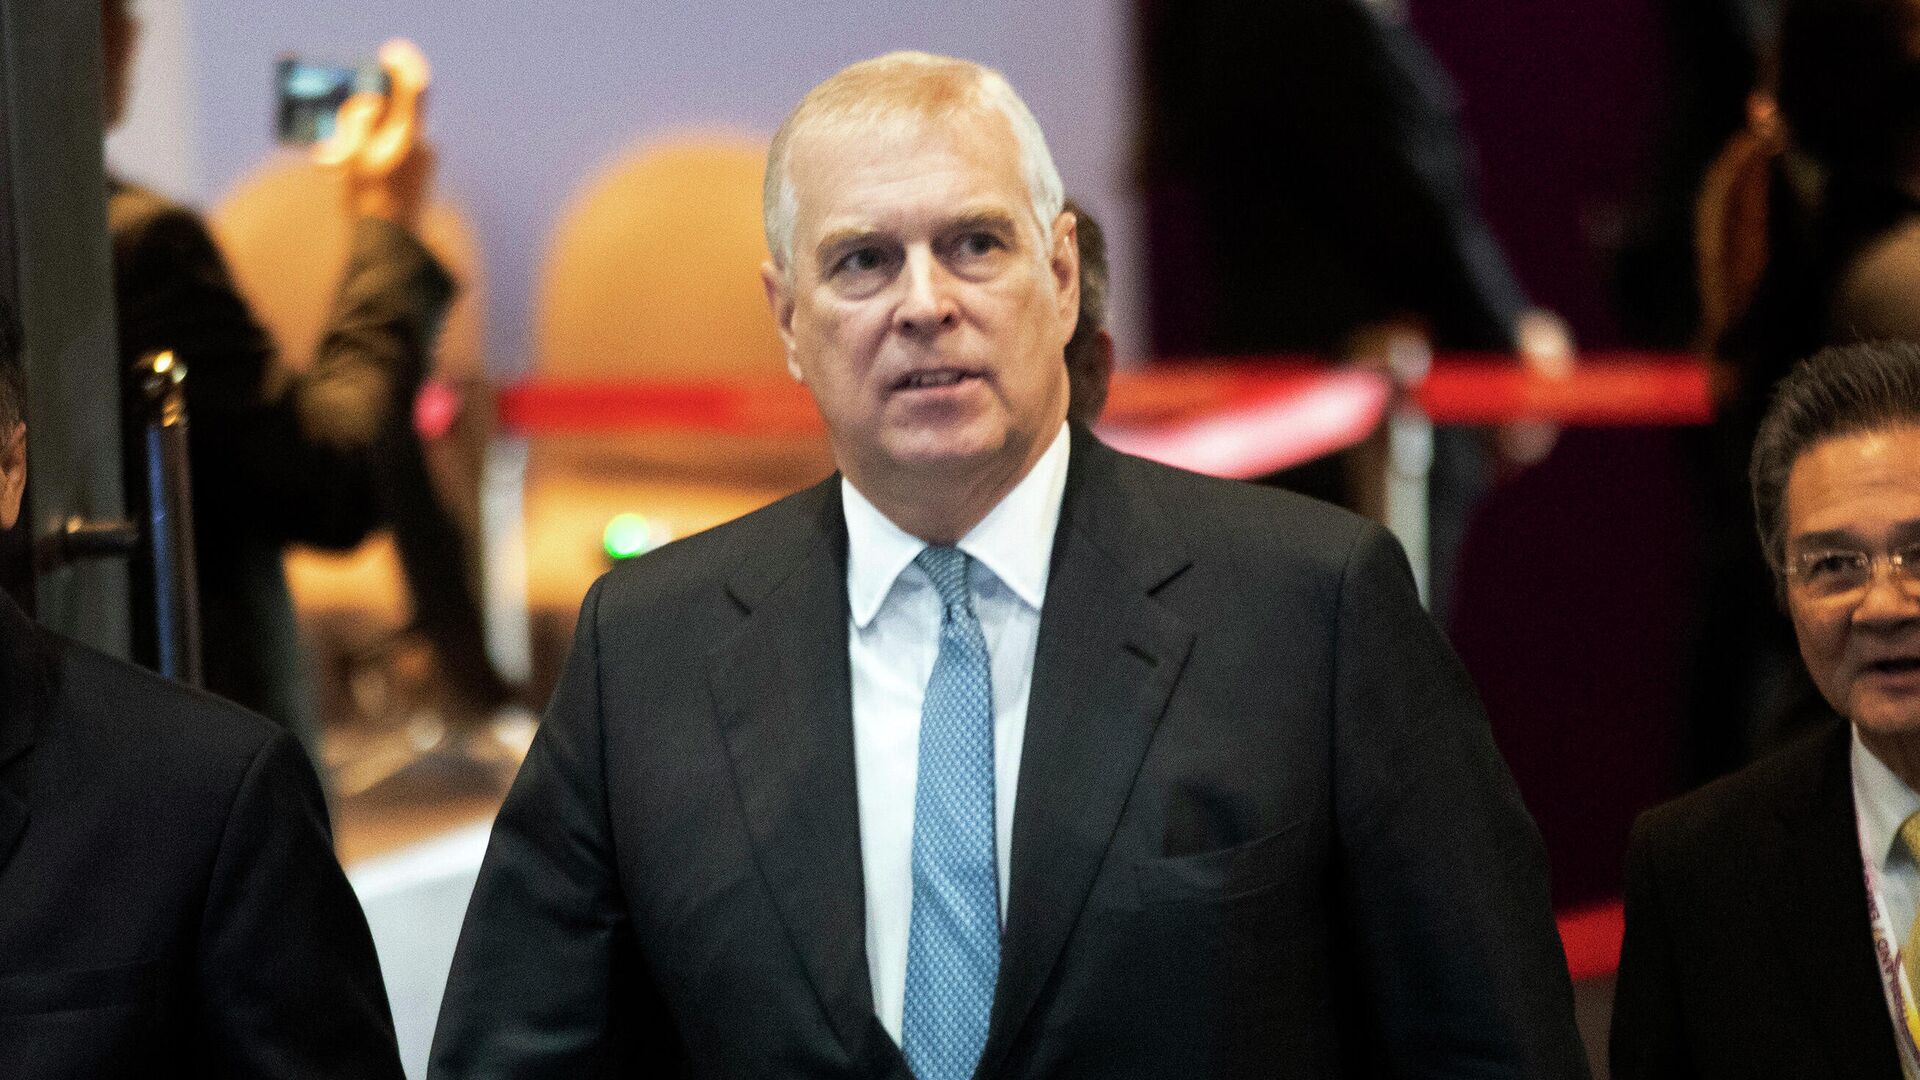 In this Nov. 3, 2019 file photo, Britain's Prince Andrew arrives at ASEAN Business and Investment Summit (ABIS) in Nonthaburi, Thailand. Prince Andrew wasn’t on trial in the Ghislaine Maxwell sex trafficking case, but her conviction is bad news for the man who is ninth in line to the British throne. (AP Photo/Sakchai Lalit, file) - Sputnik International, 1920, 15.02.2022